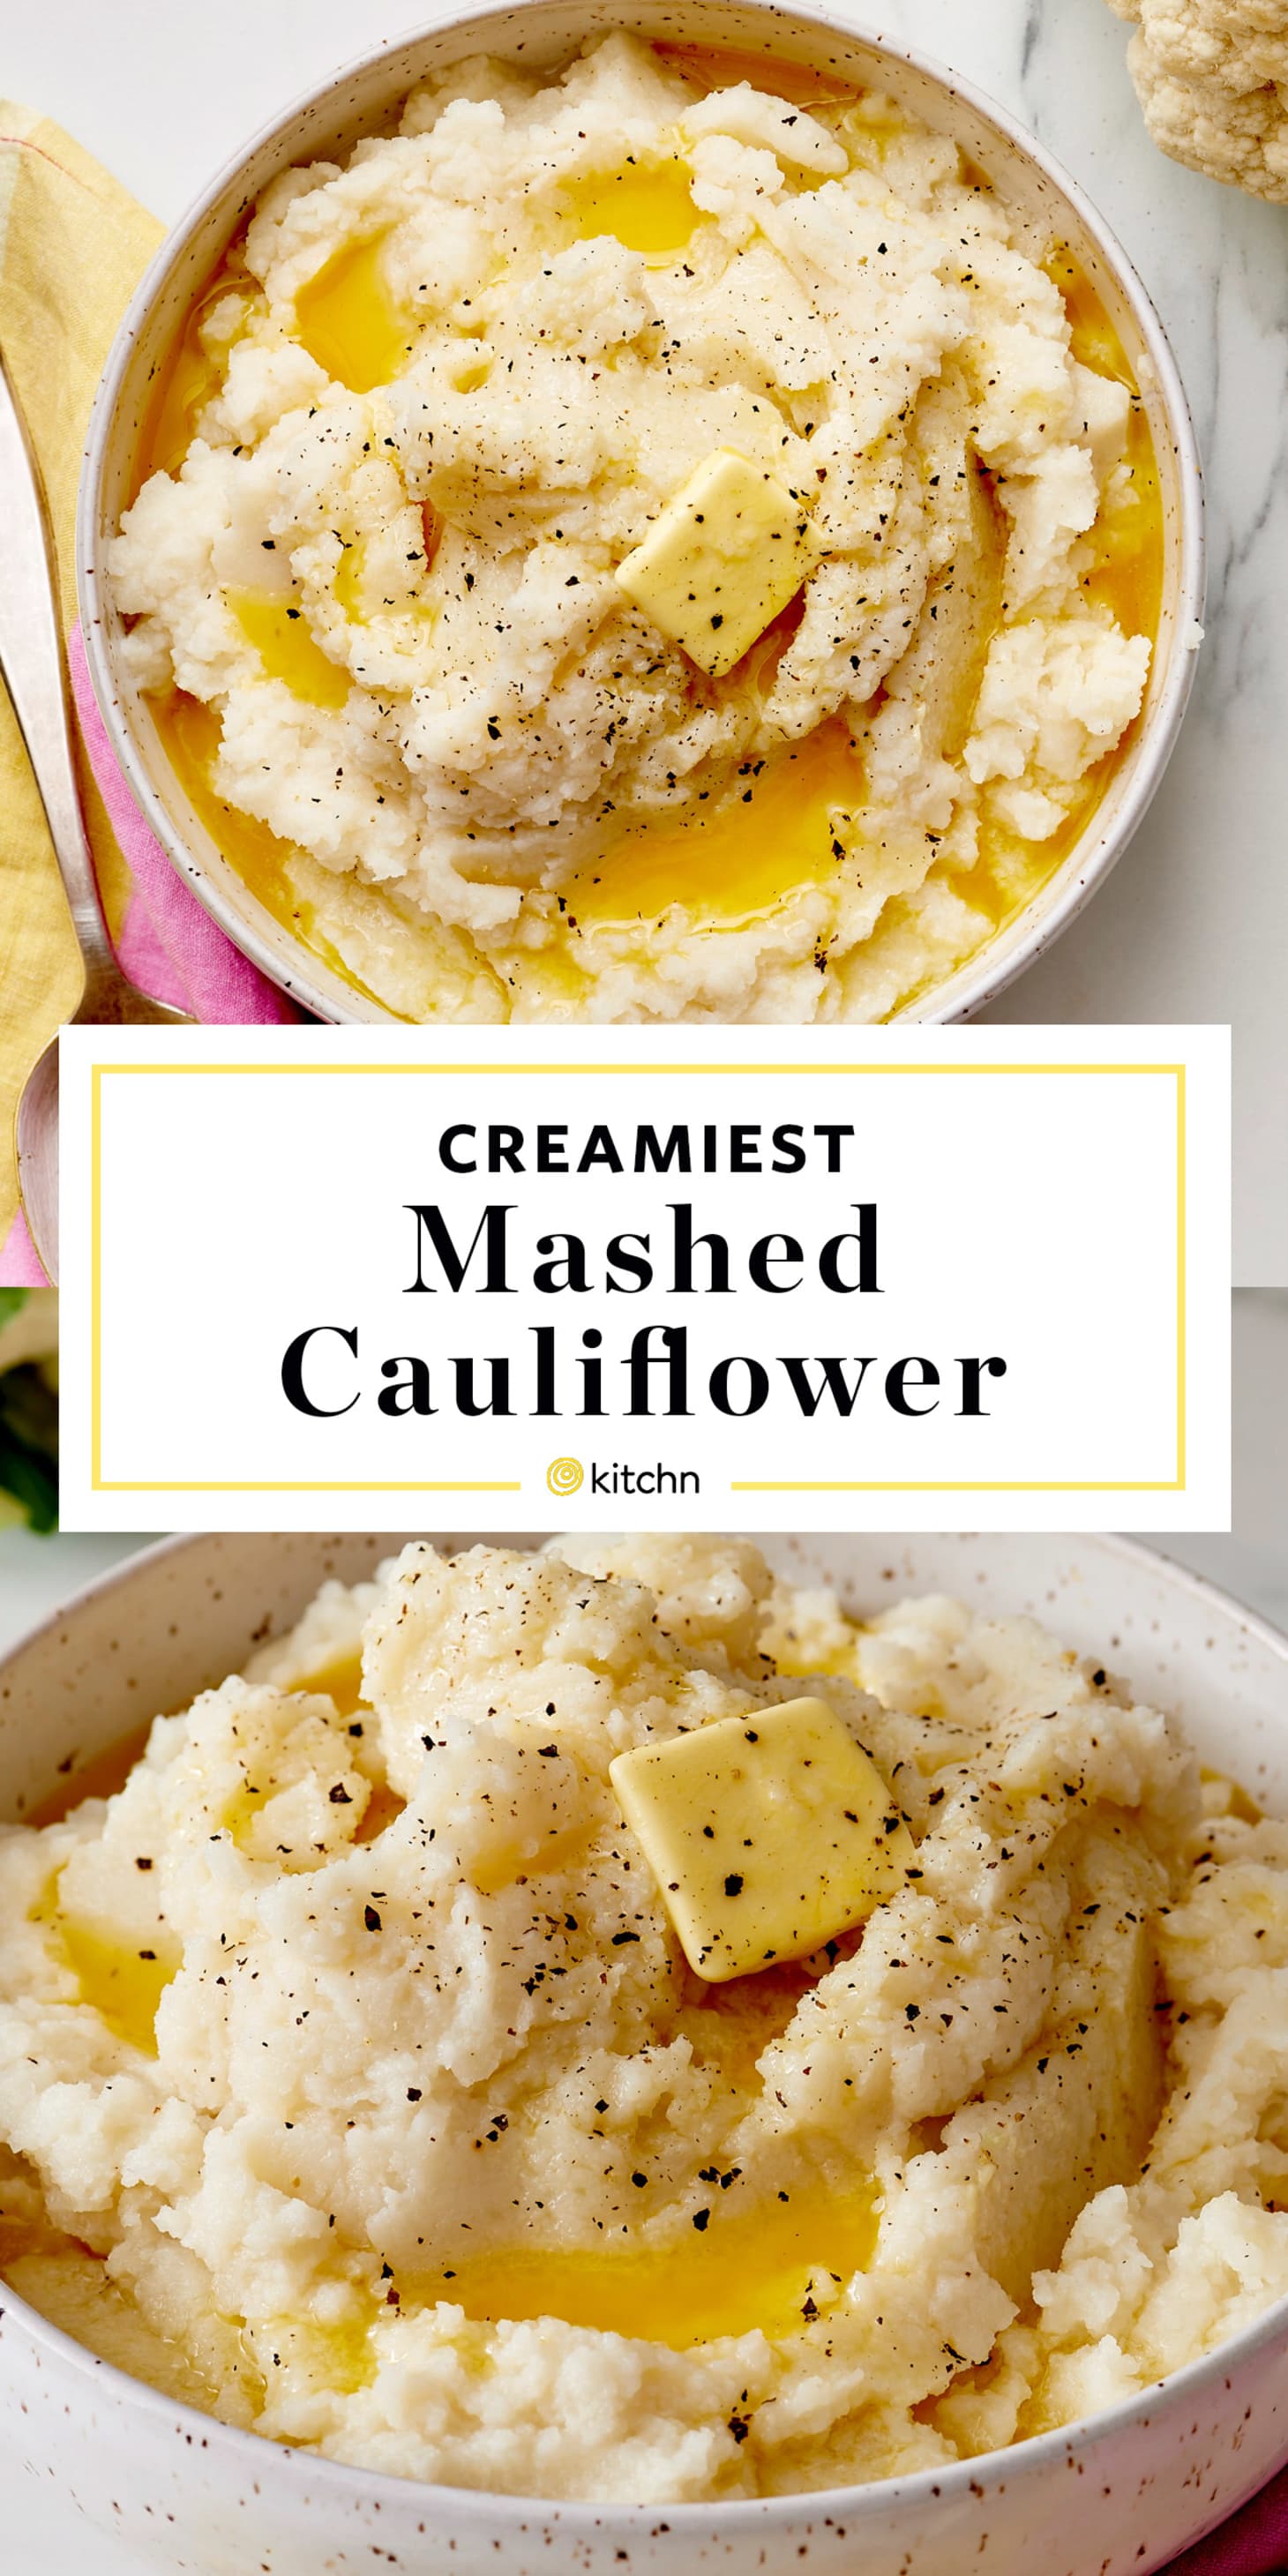 How To Make the Creamiest Mashed Cauliflower, Without ...